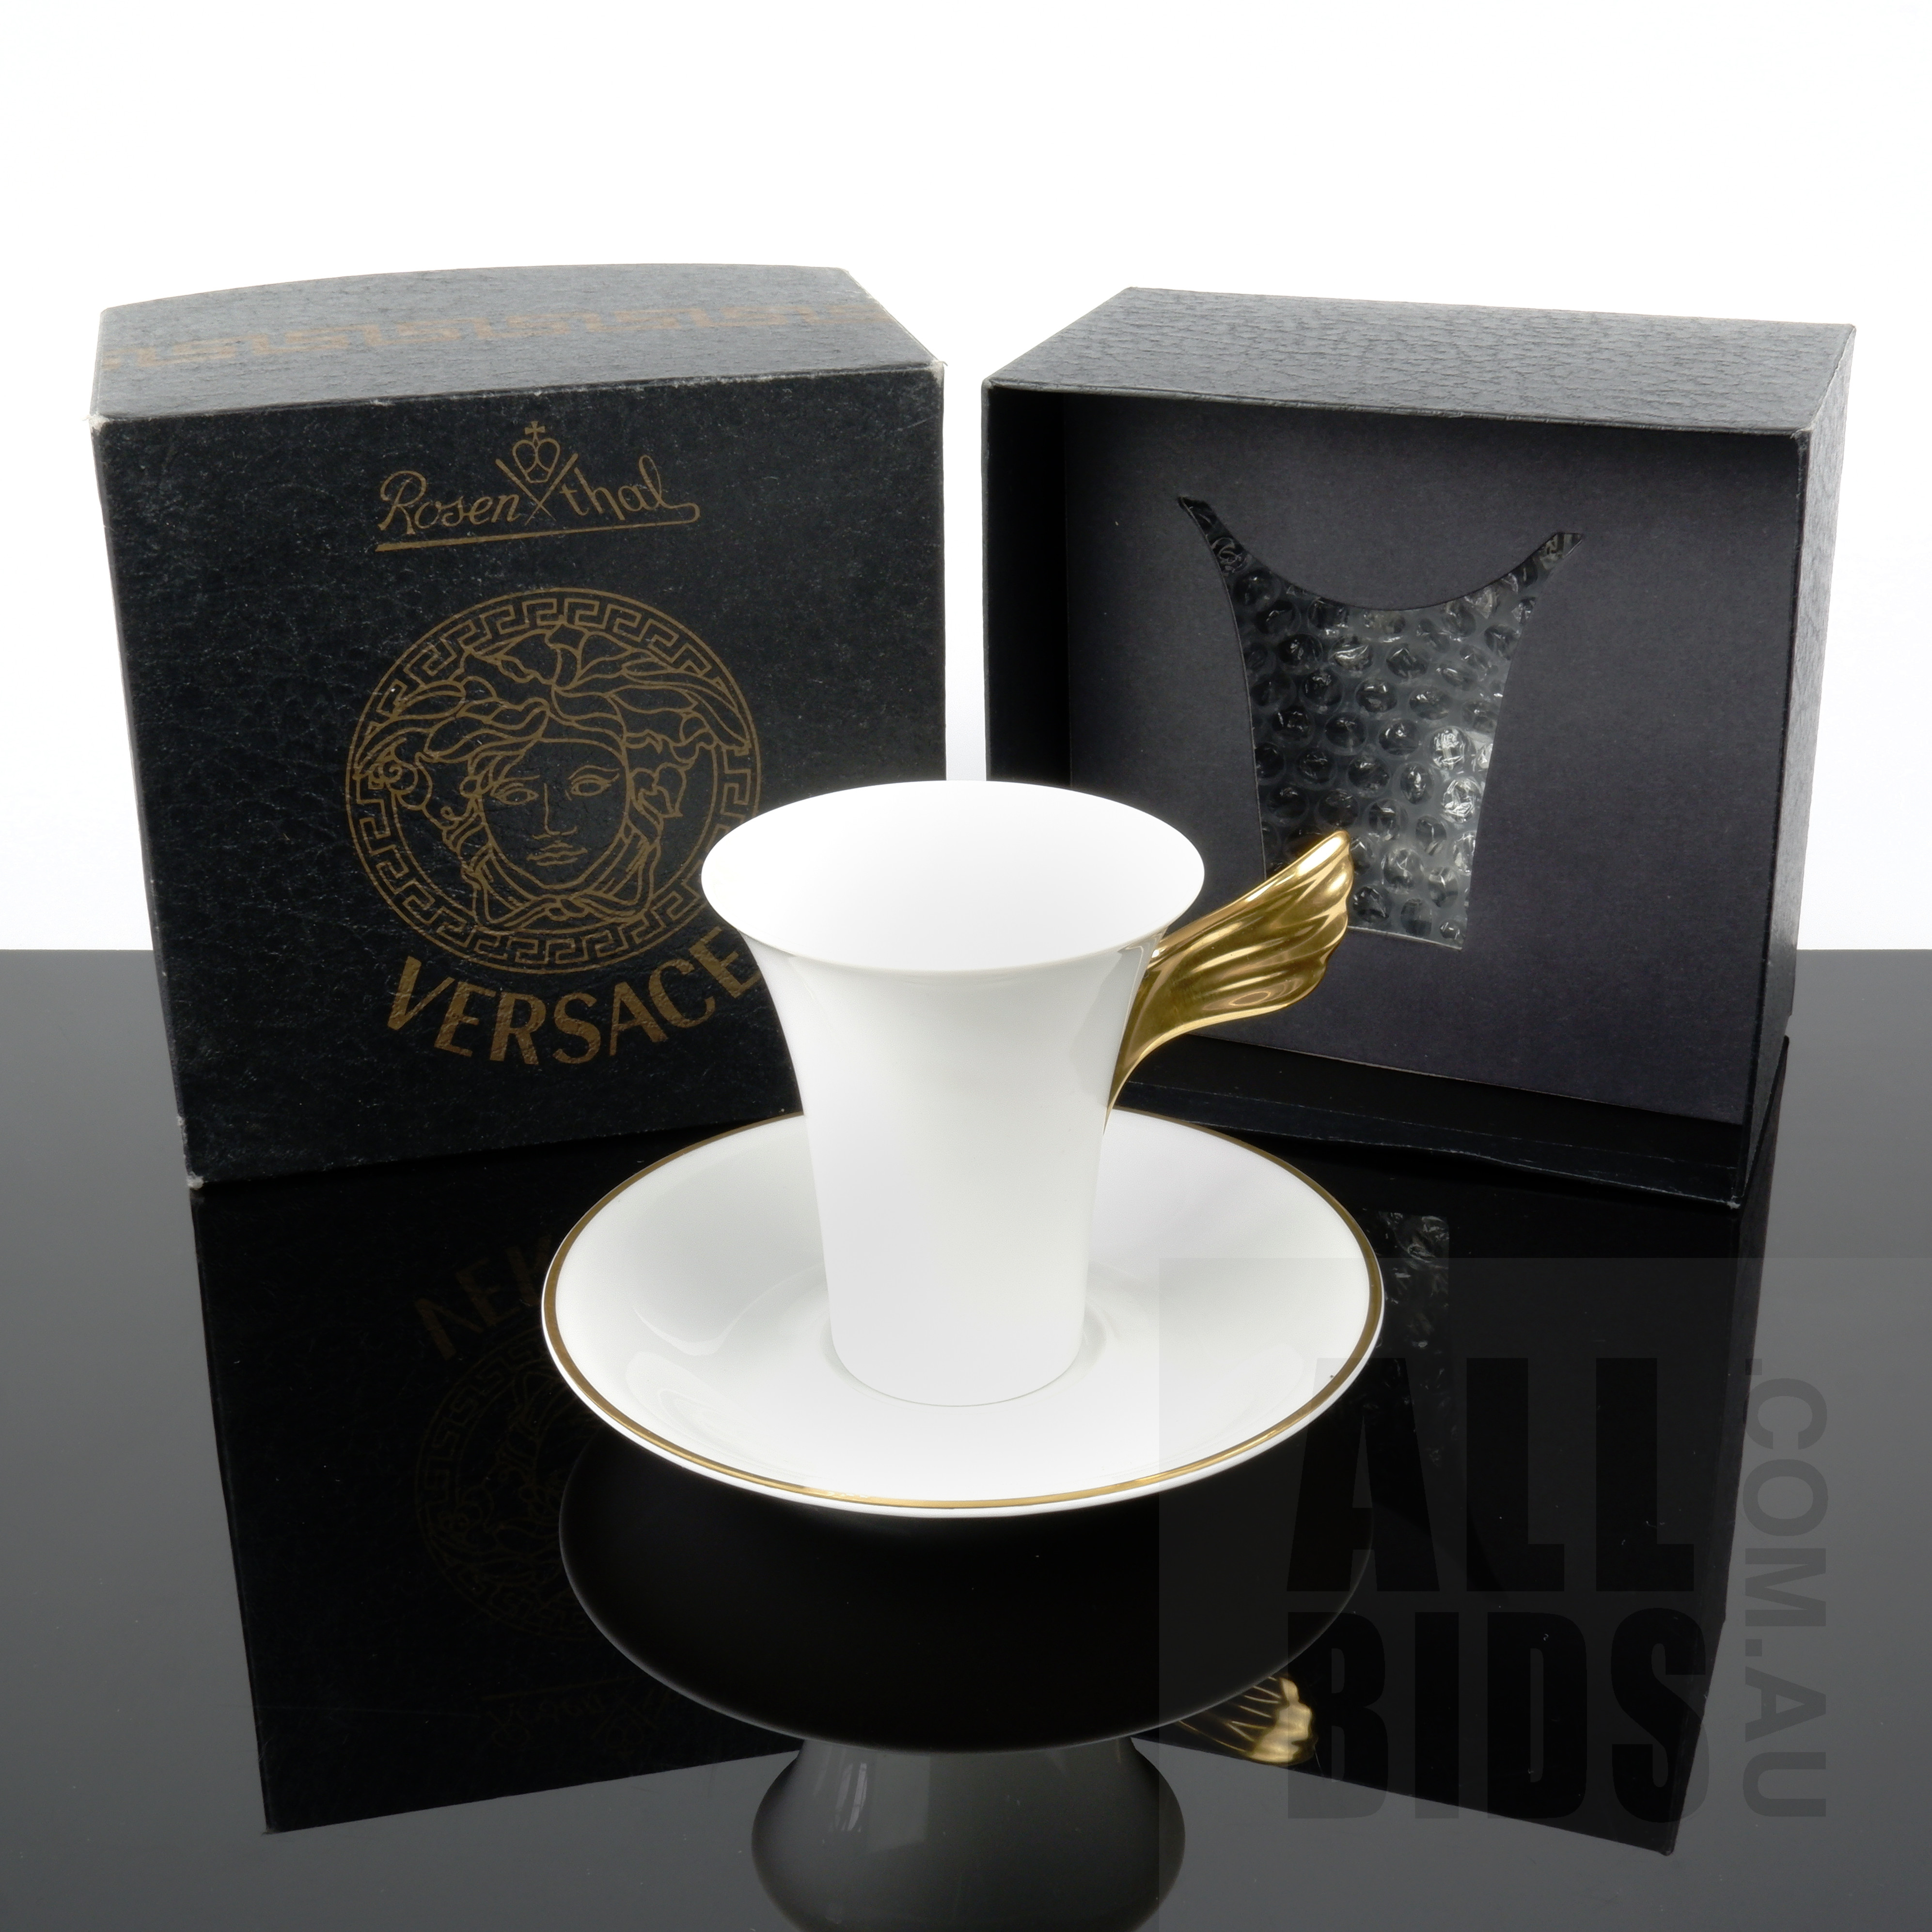 '8th of 8 Available - One As New Boxed Versace Special Edition Nescafe Gold Gilt Porcelain Coffee Cup and Saucer Manufactured by Rosenthal Studio-Line'